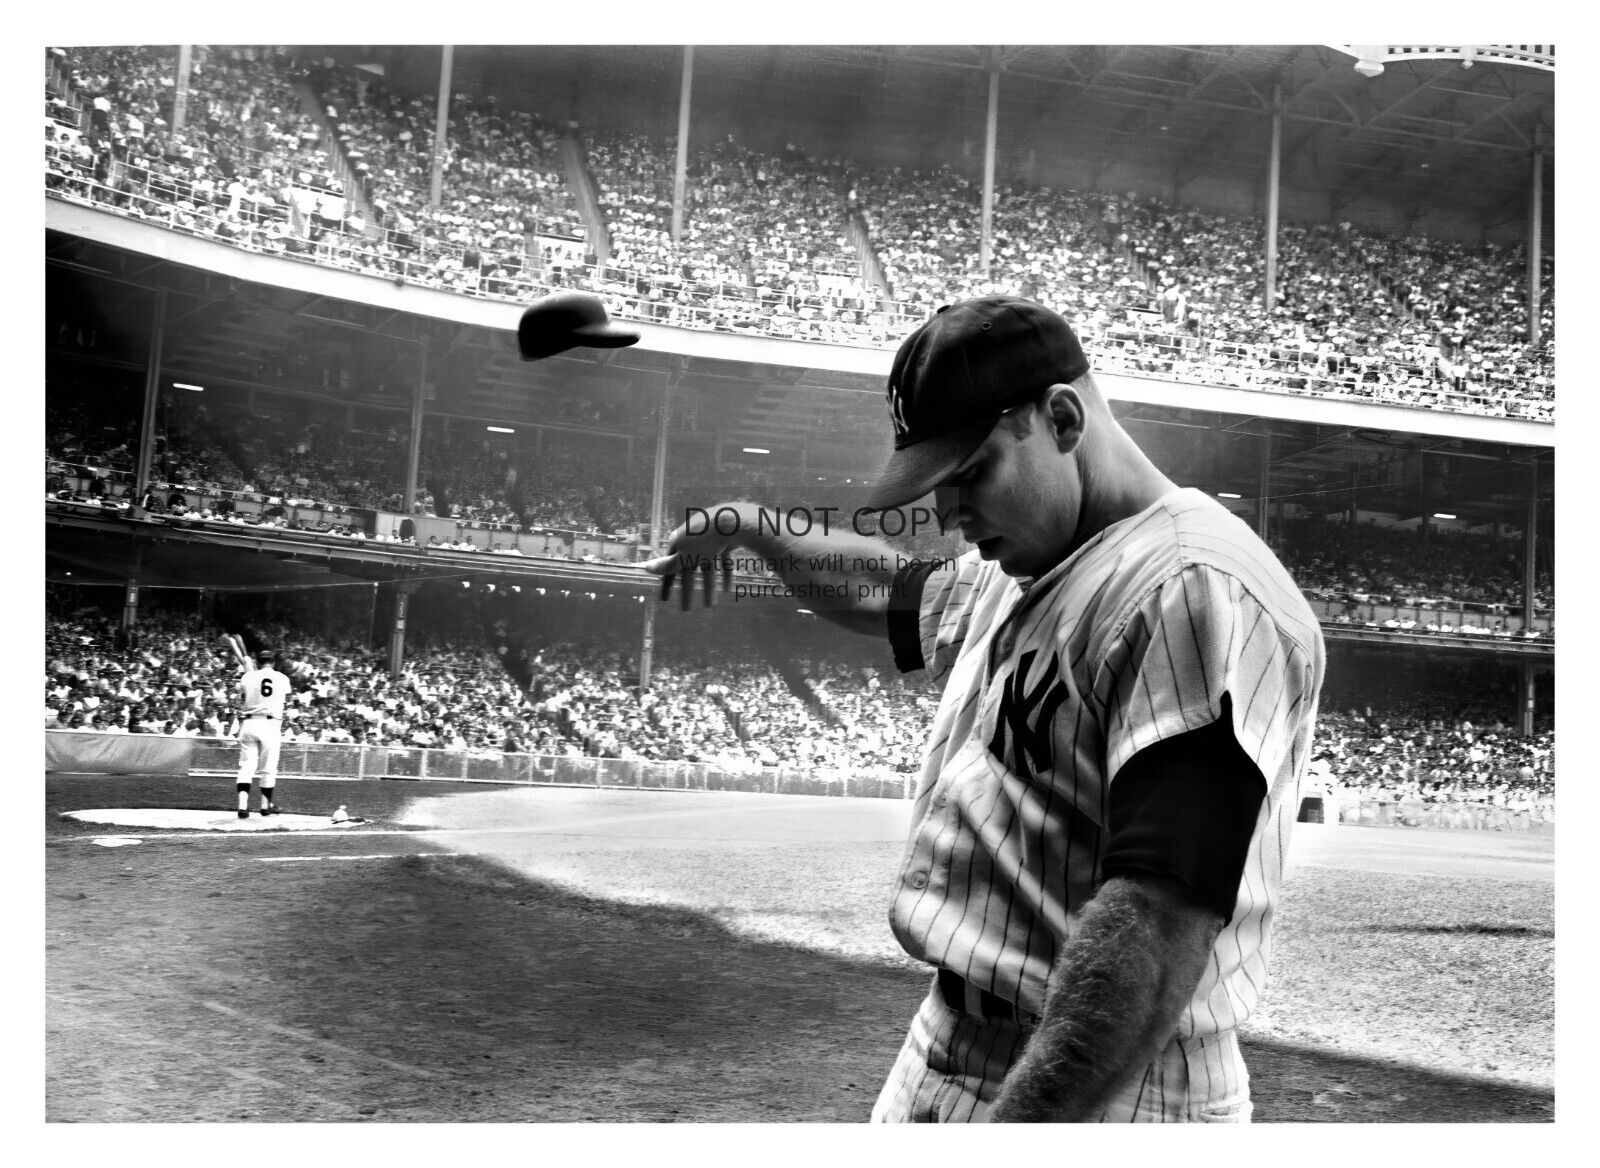 MICKEY MANTLE THROWING A HAT NEW YORK YANKEES BASEBALL 5X7 PHOTO